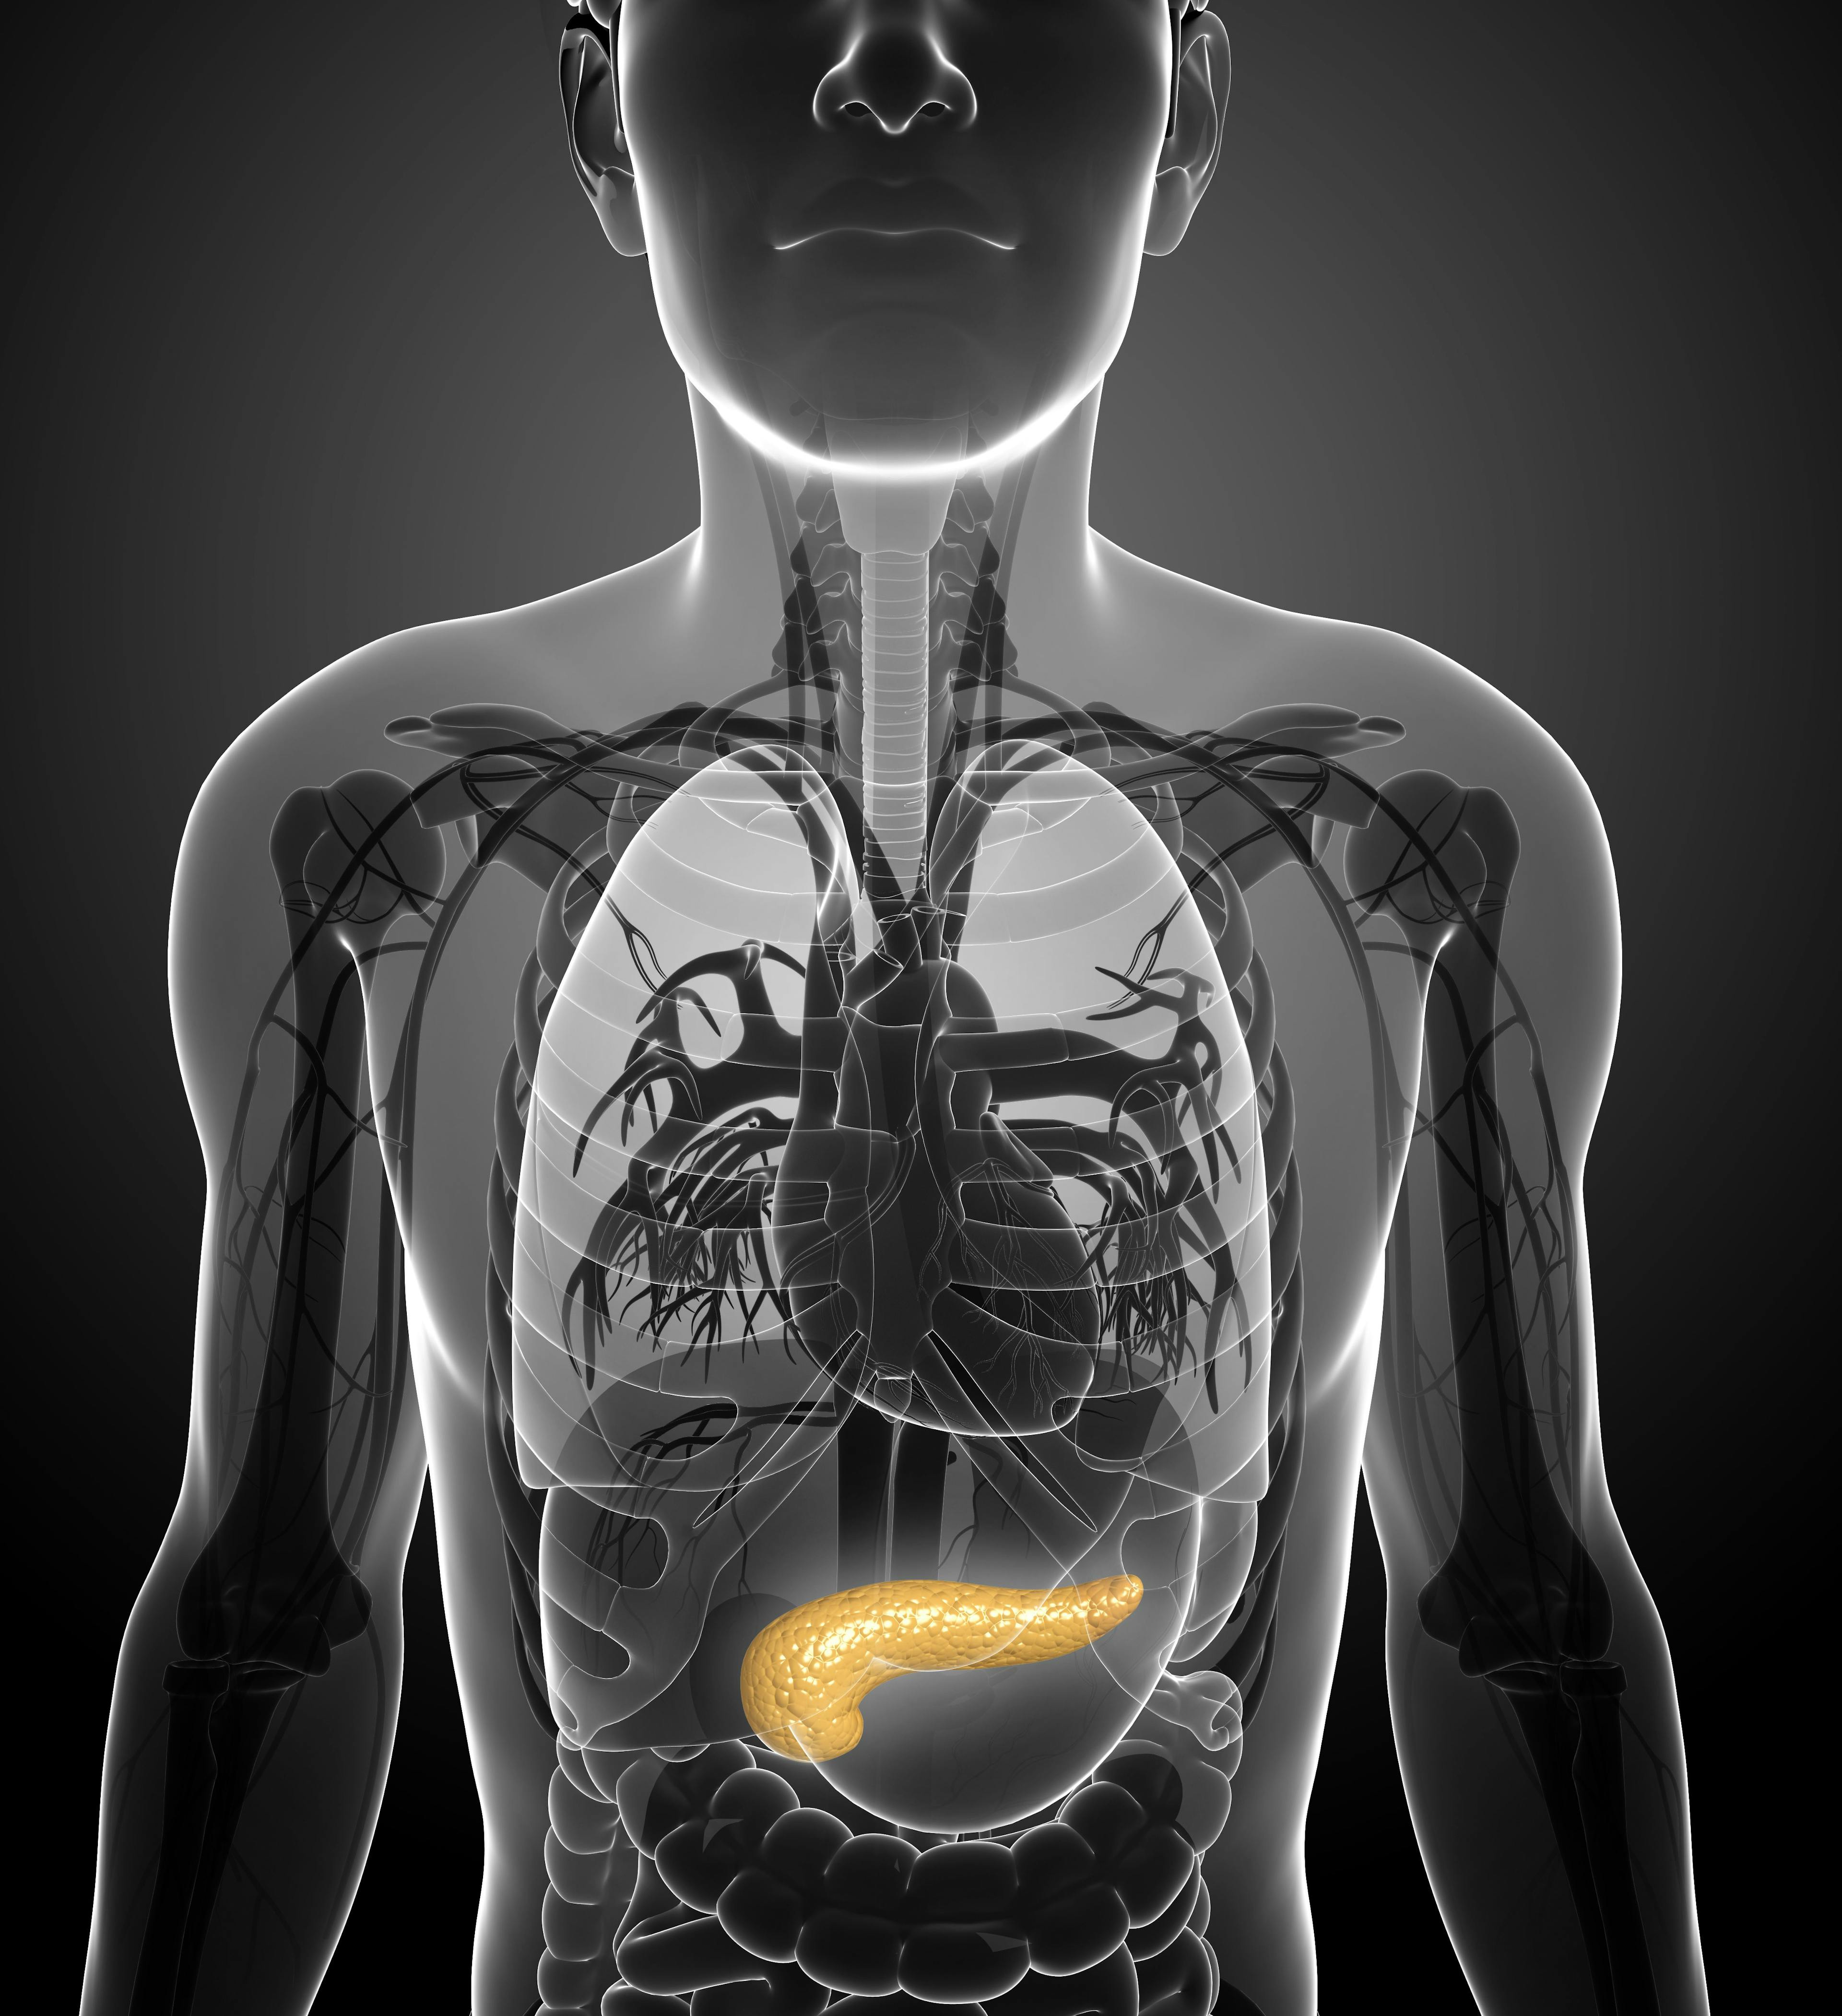 Uptake of Artificial Pancreas Systems in Primary Care Could Reduce Care Disparities